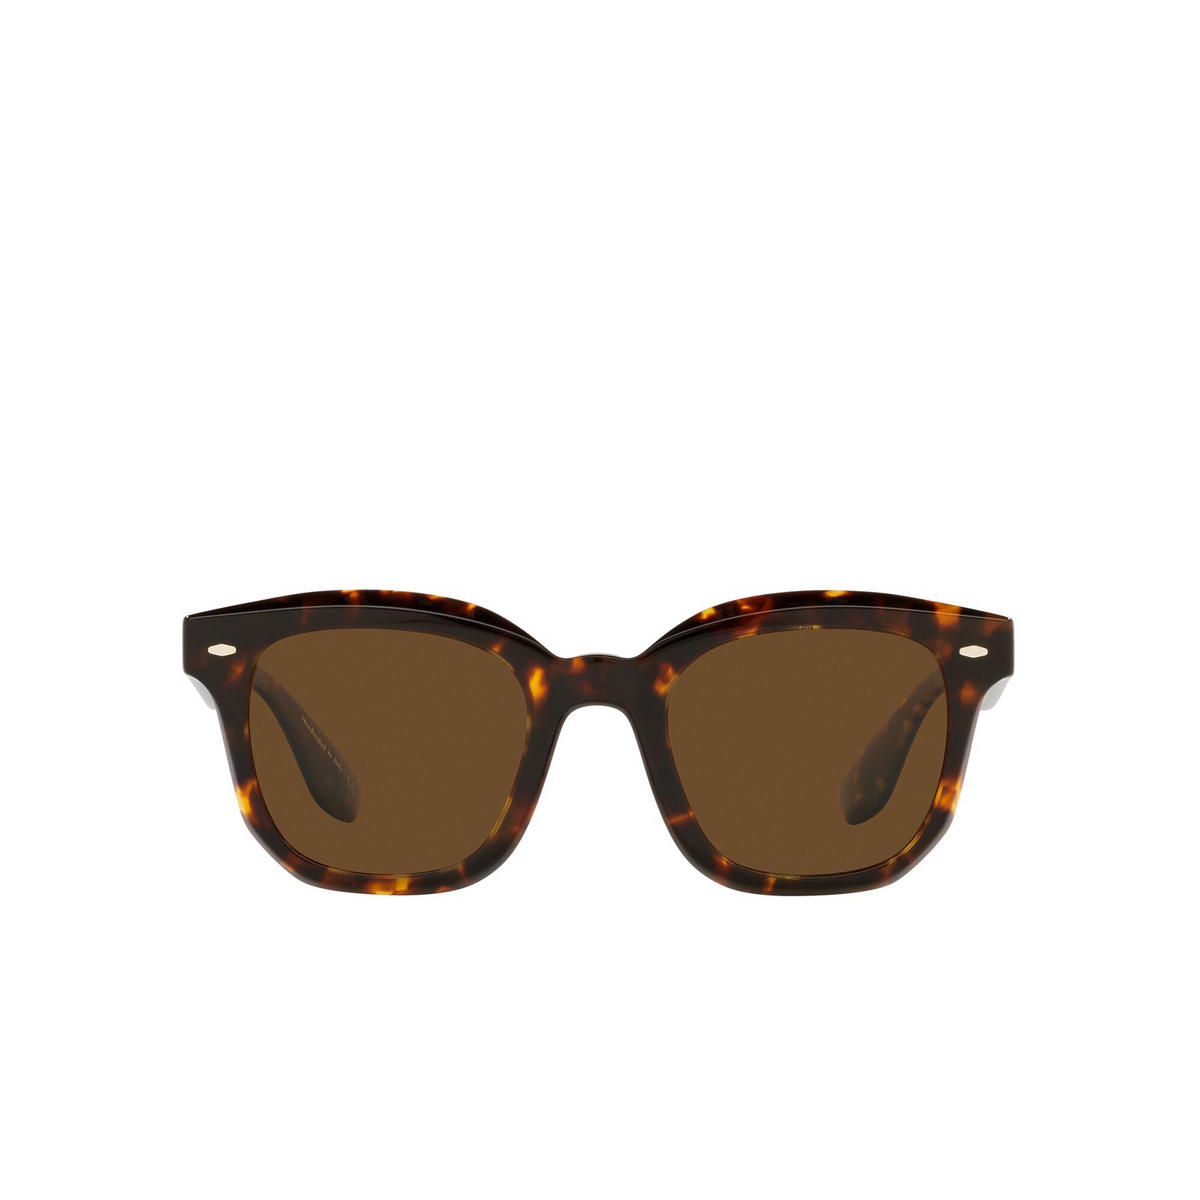 Oliver Peoples® Square Sunglasses: Filu' OV5472SU color Dm2 165457 - front view.